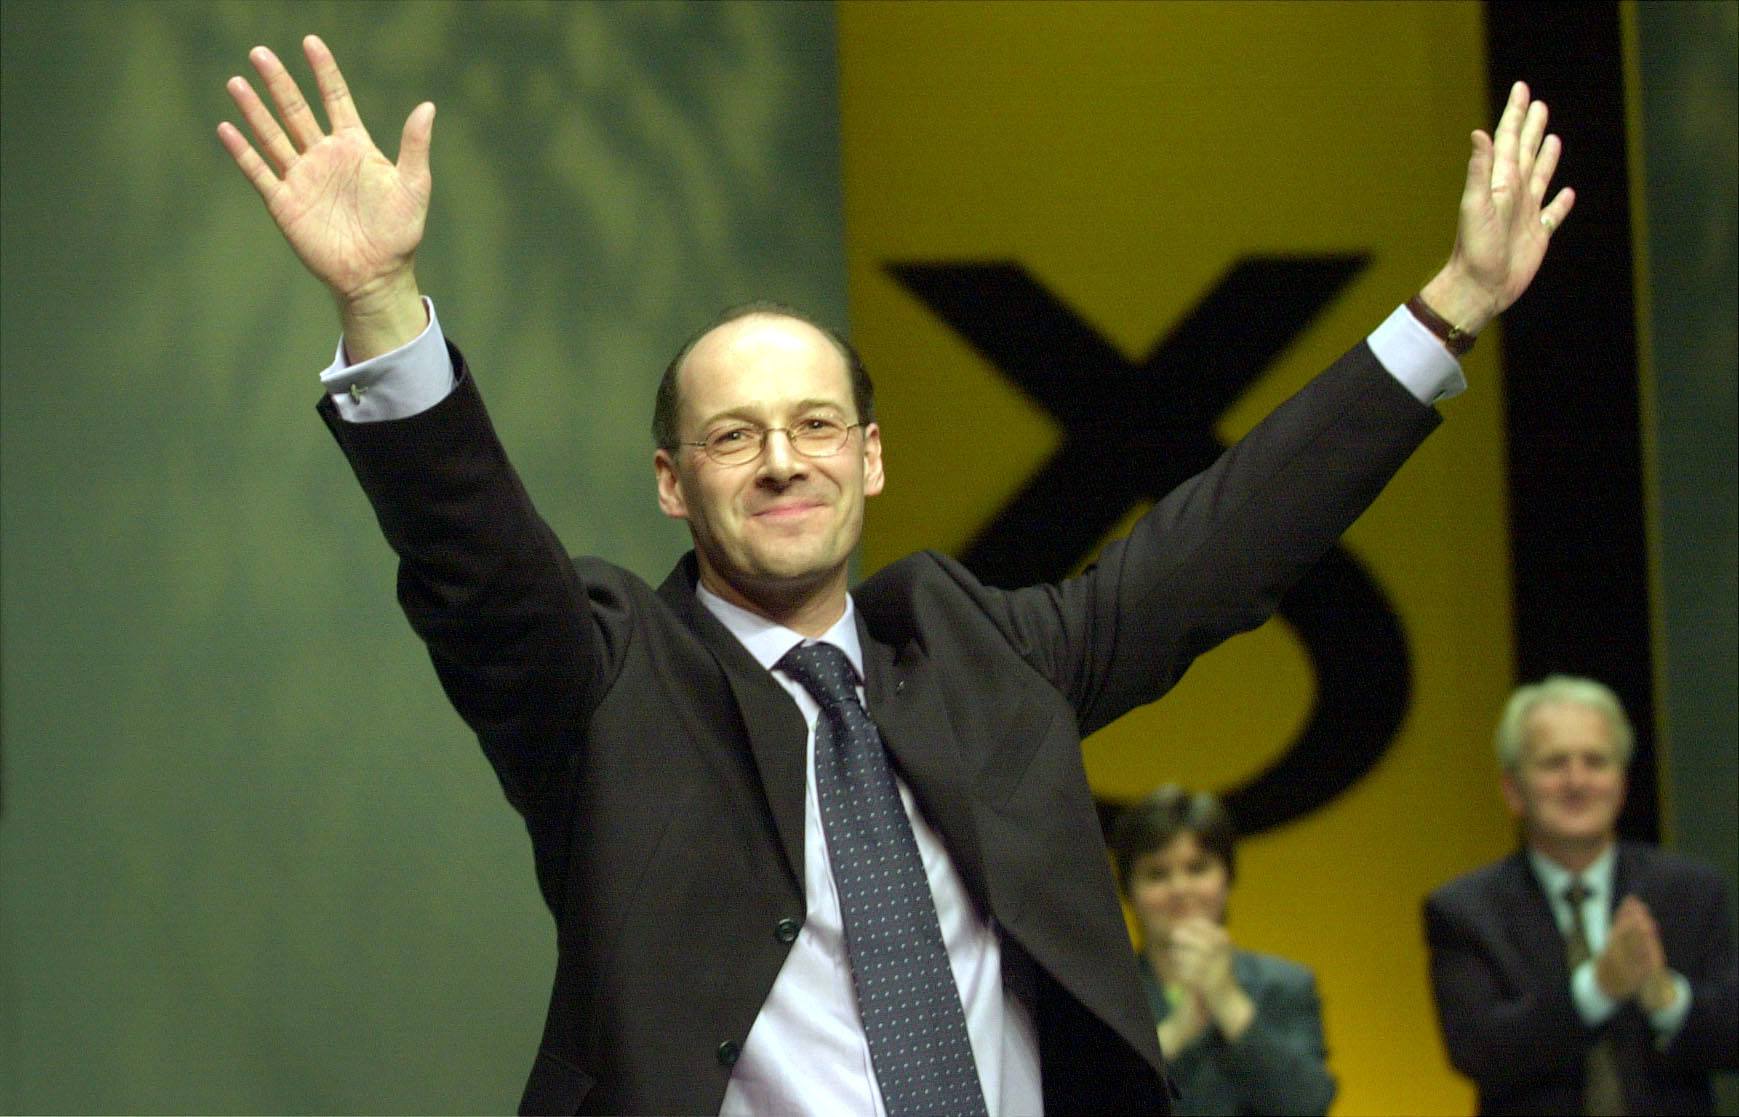 It's the second time John Swinney has been the leader of the SNP after a four-year stint in the early 2000s.